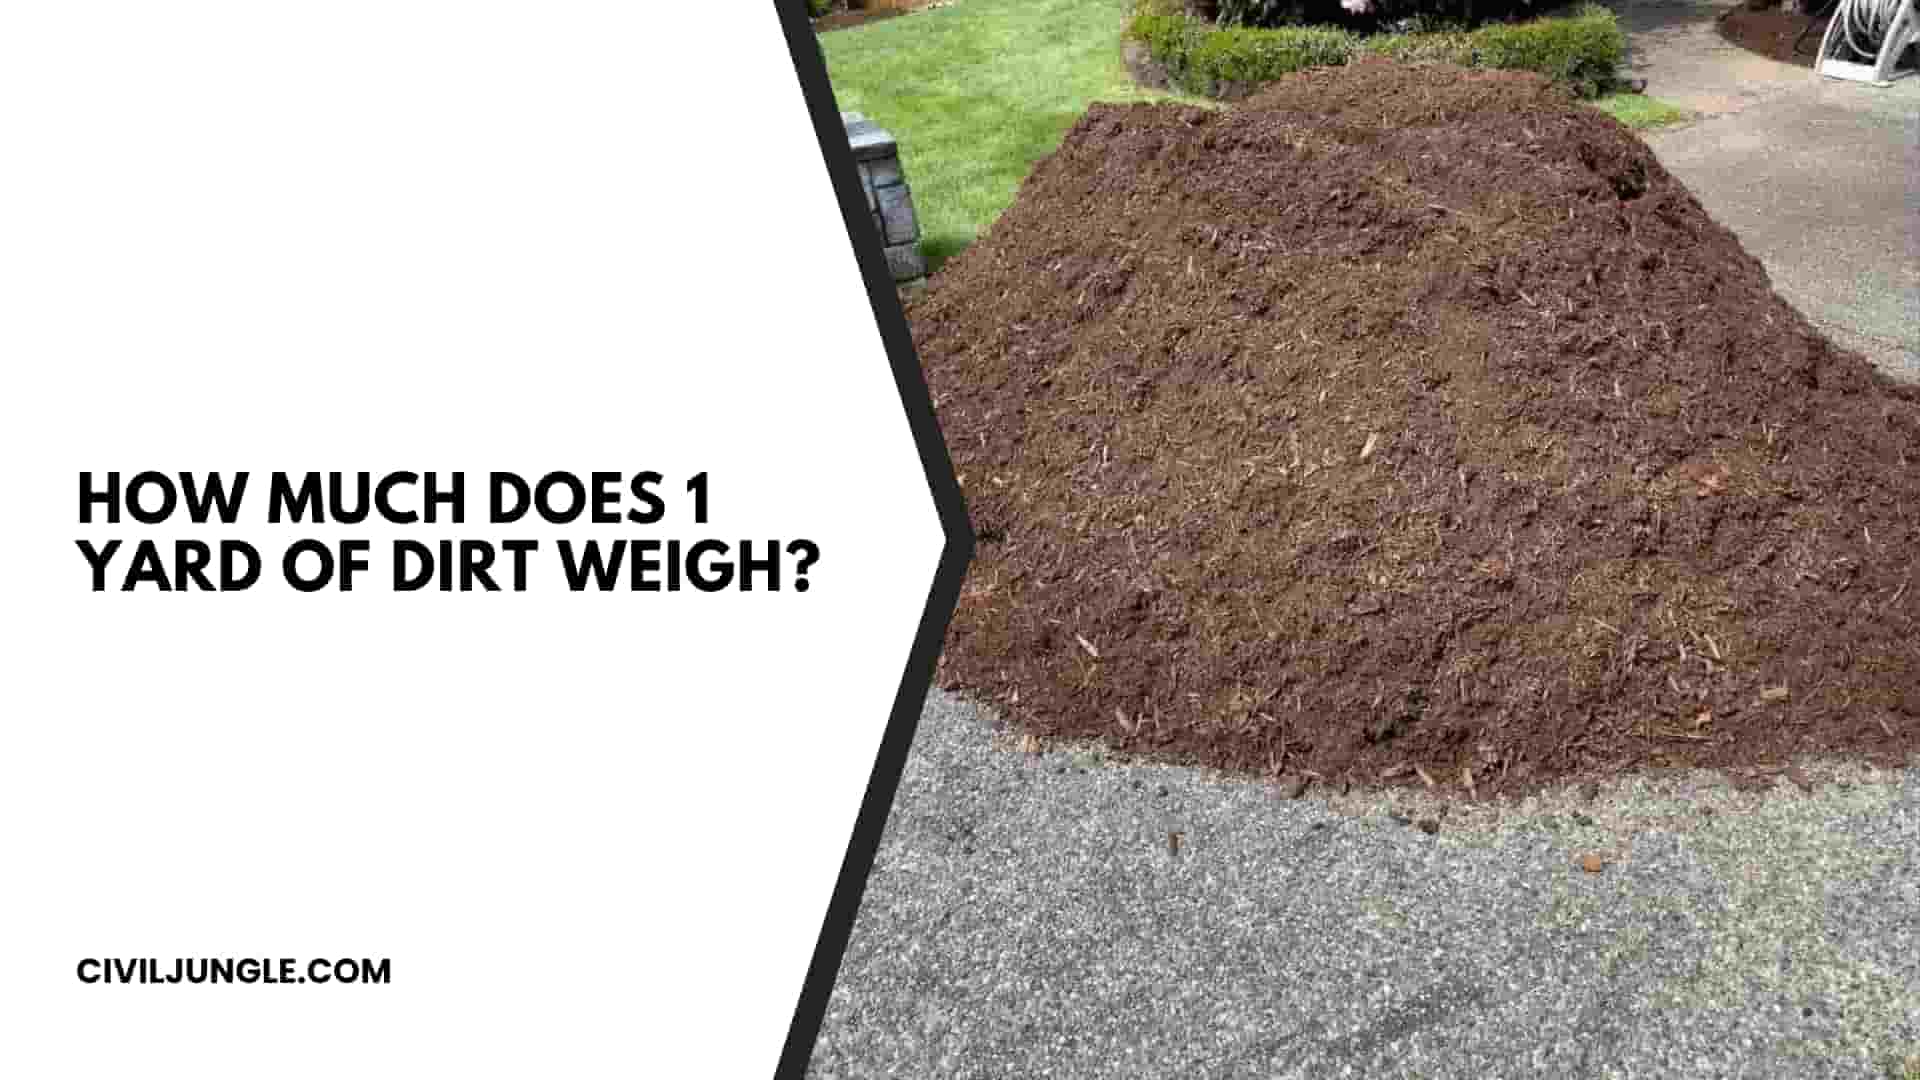 How Much Does 1 Yard of Dirt Weigh?